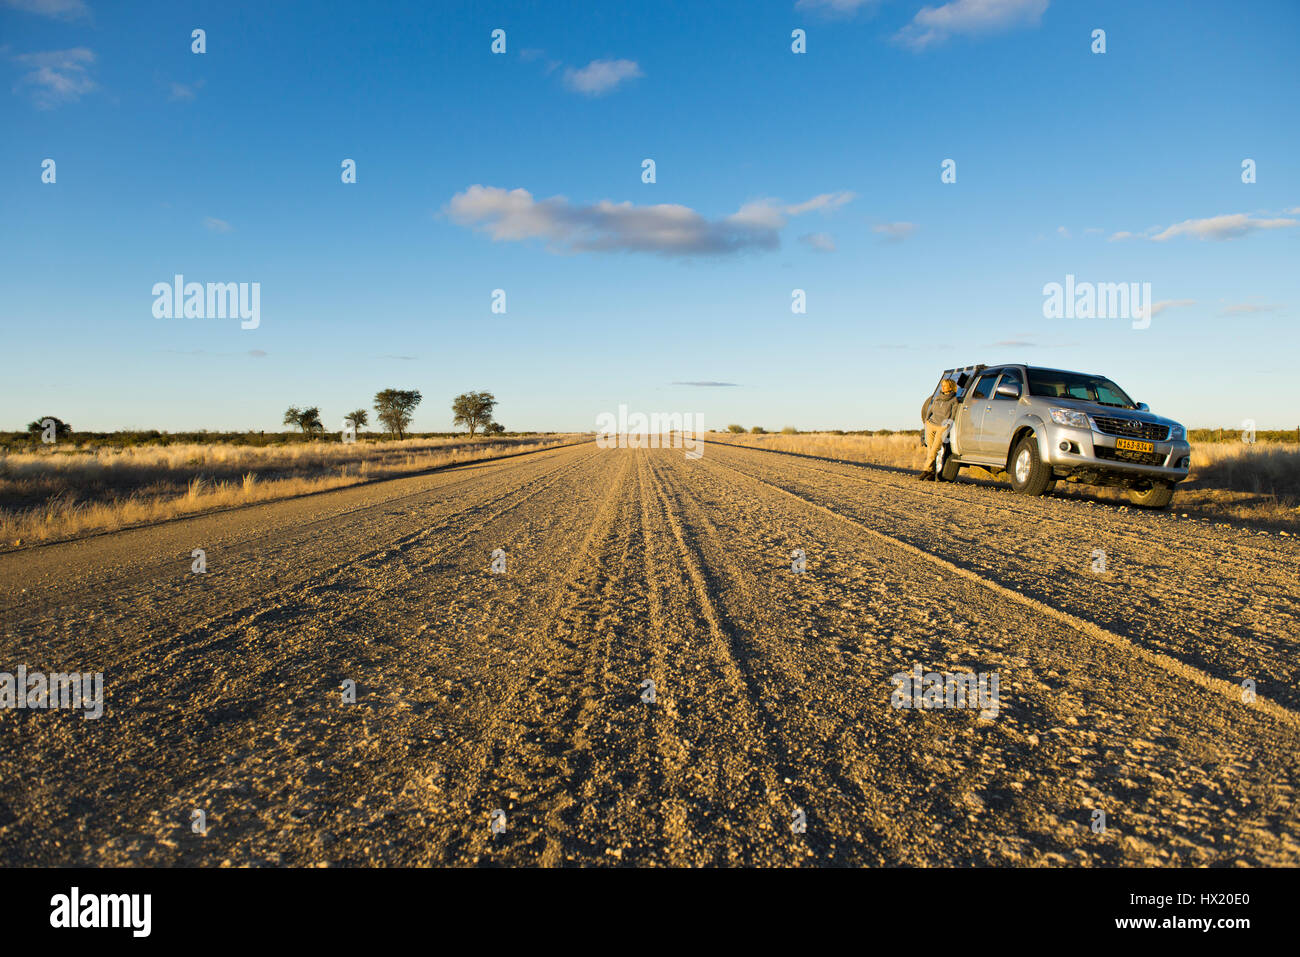 Woman stands at an offroad vehicle on gravel road C 17 near Keetmanshoop, Namibia Stock Photo